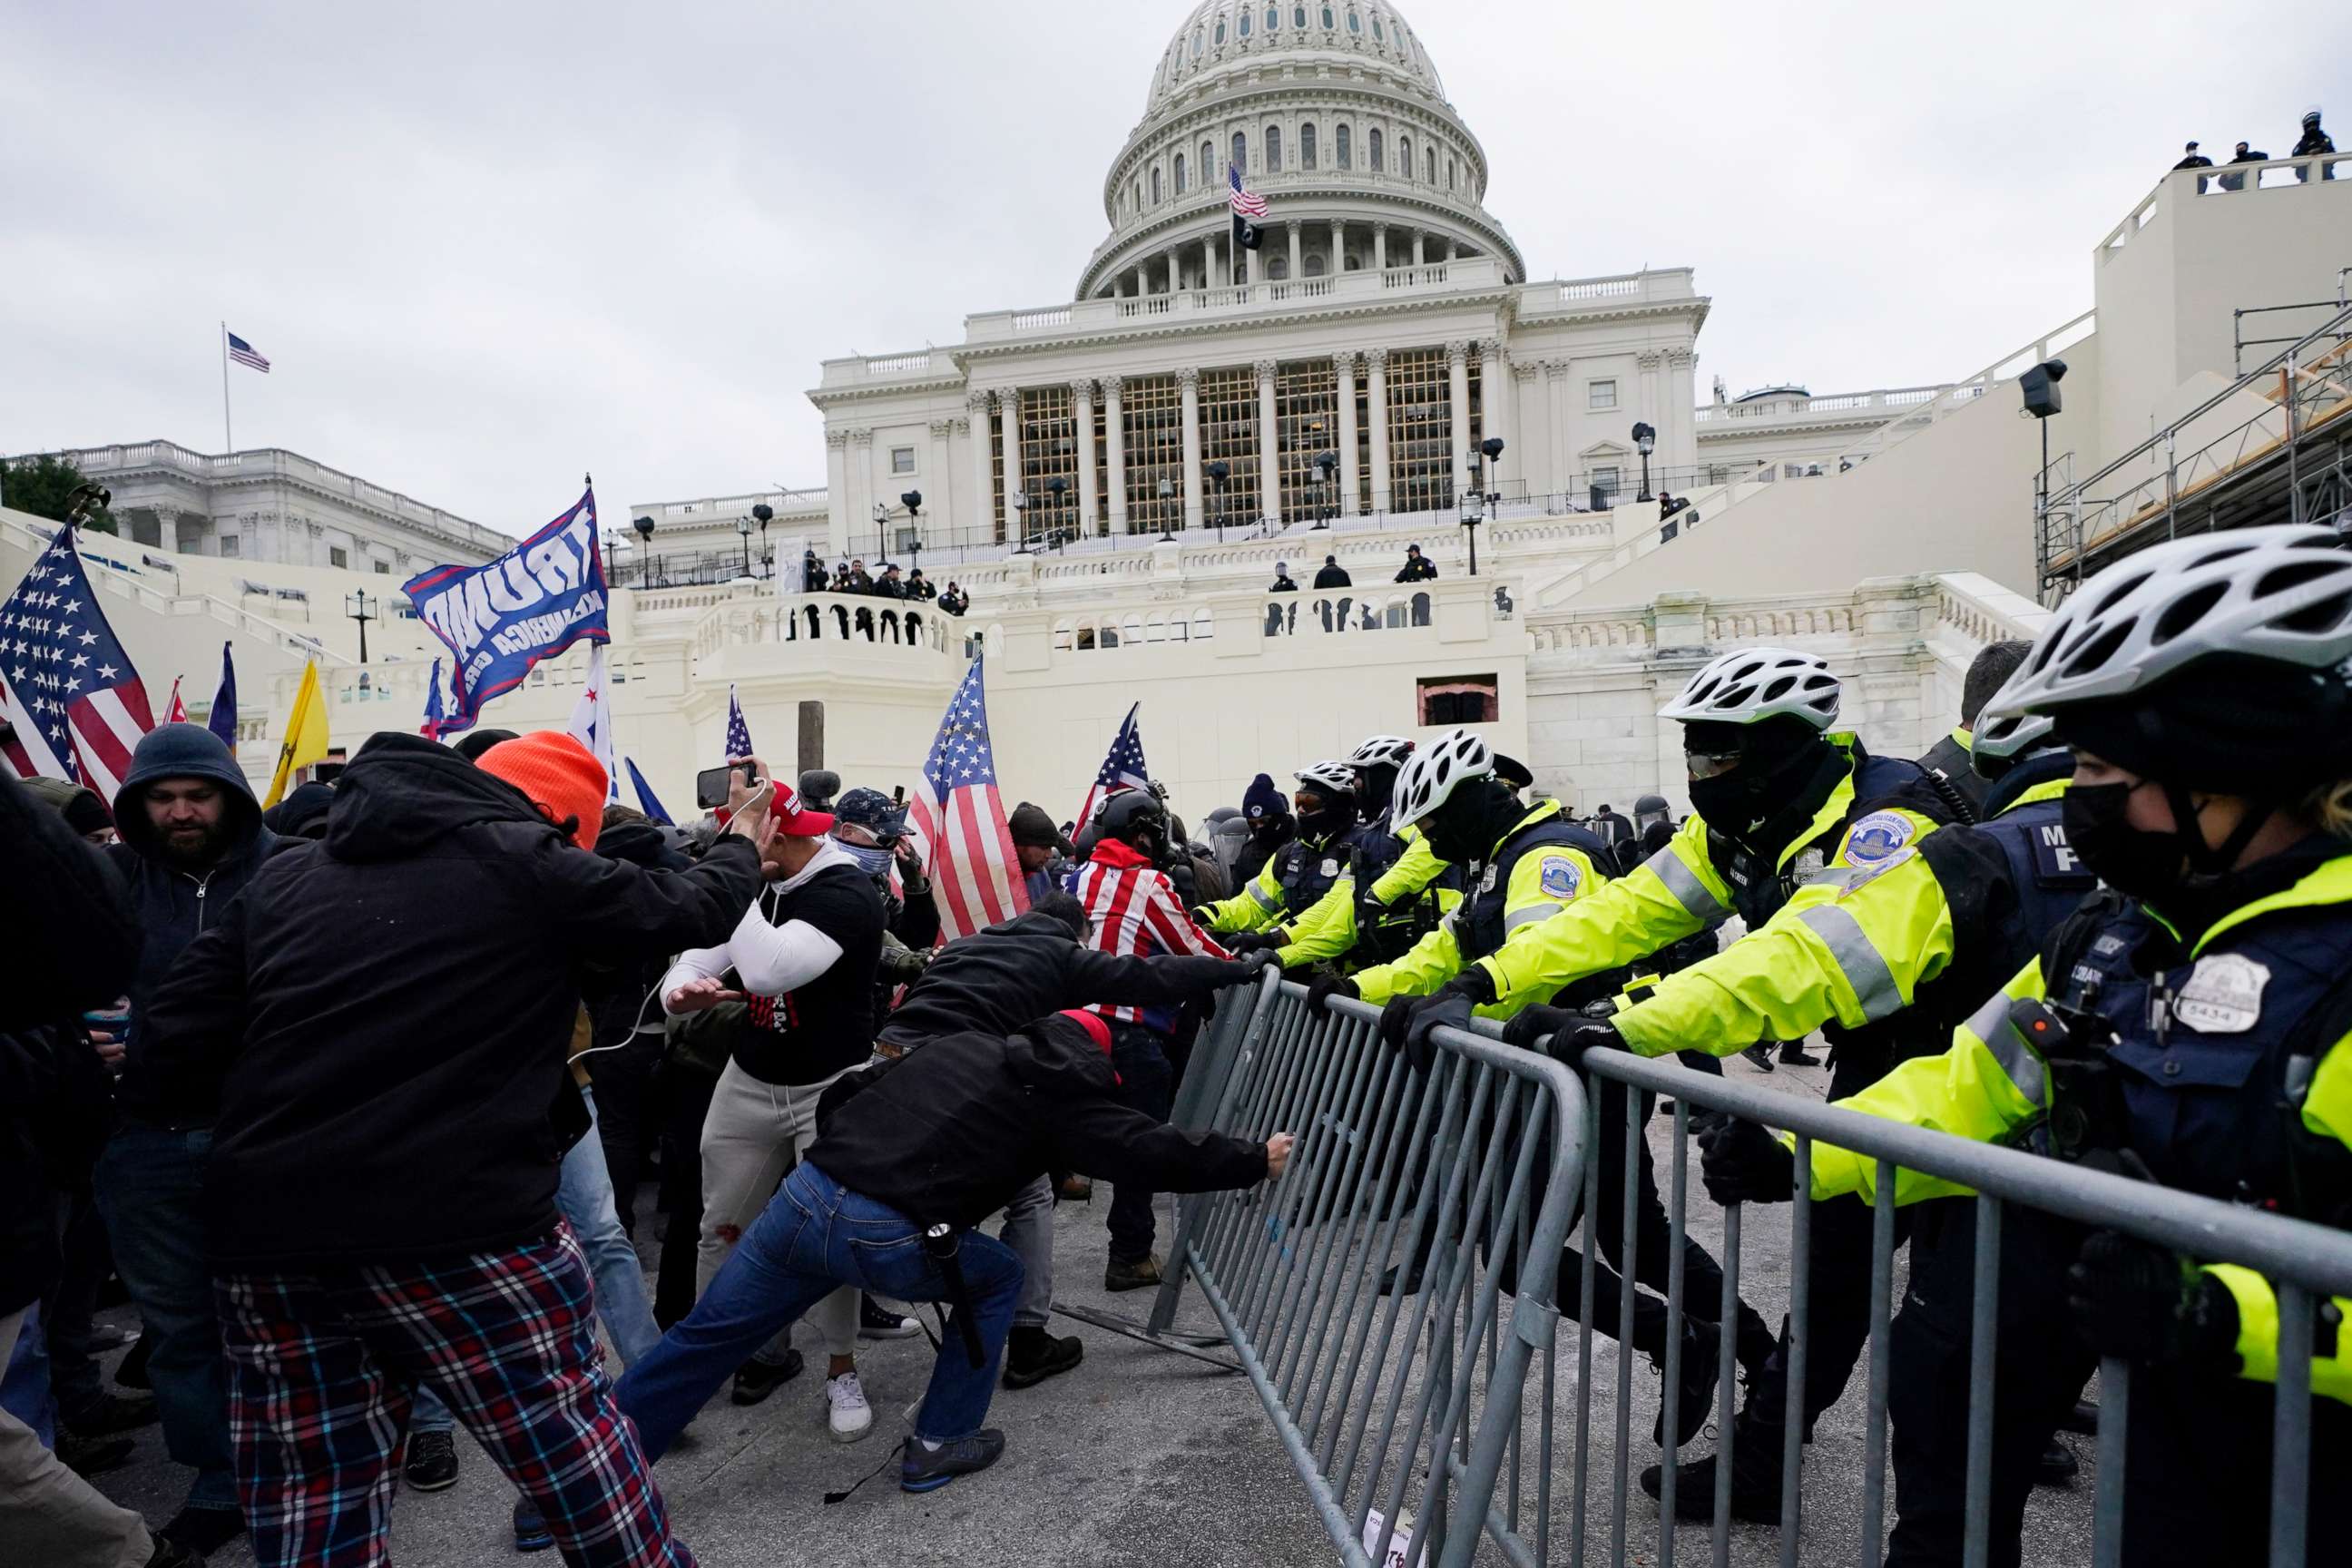 PHOTO: Trump supporters try to break through a police barrier, Jan. 6, 2021, at the Capitol in Washington.